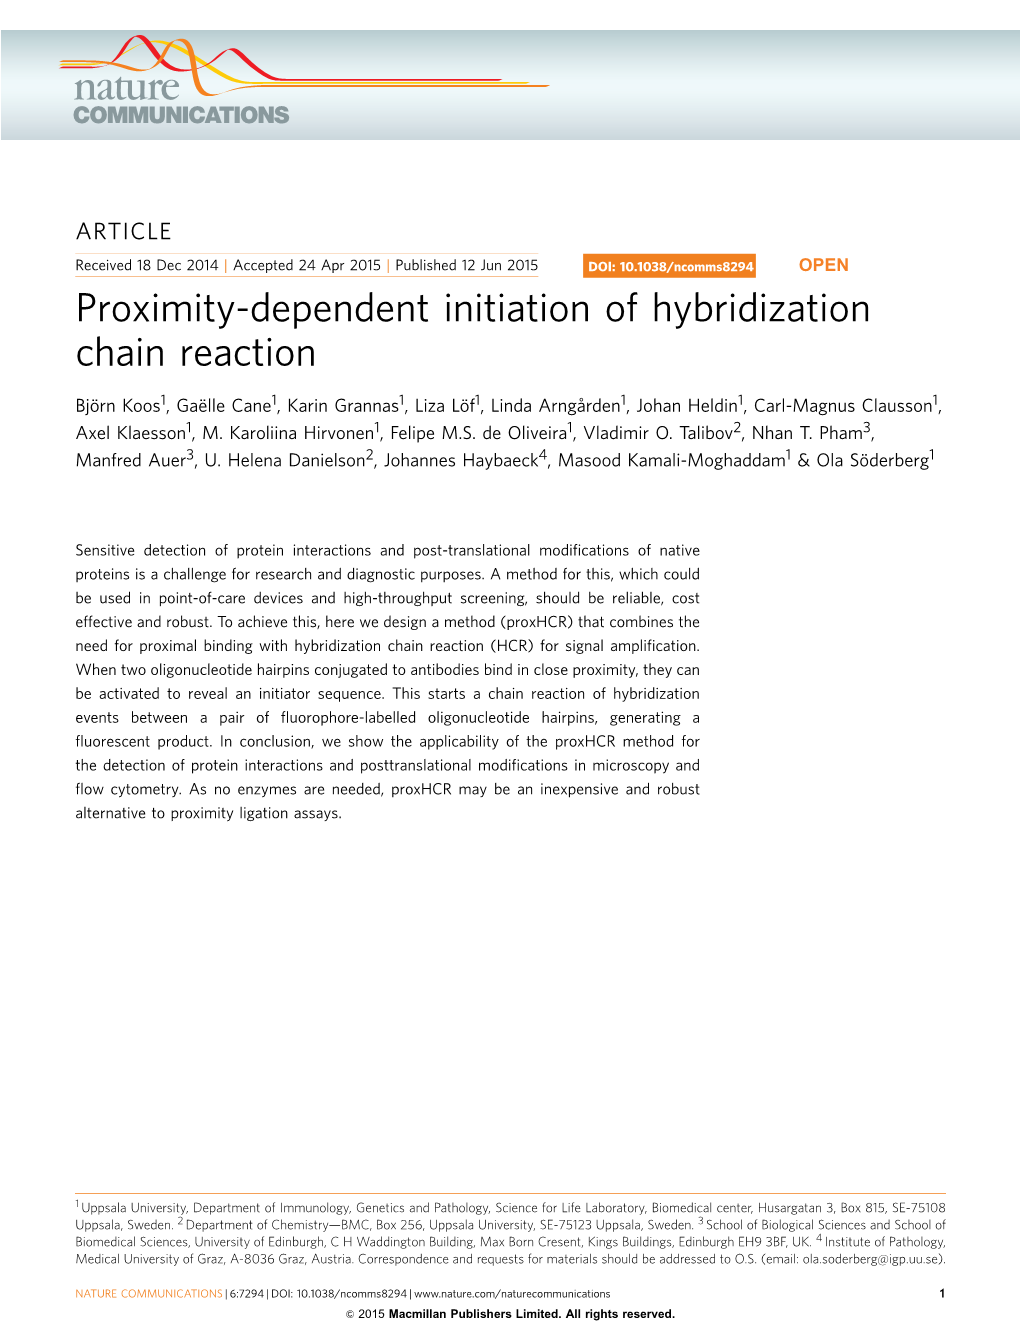 Proximity-Dependent Initiation of Hybridization Chain Reaction